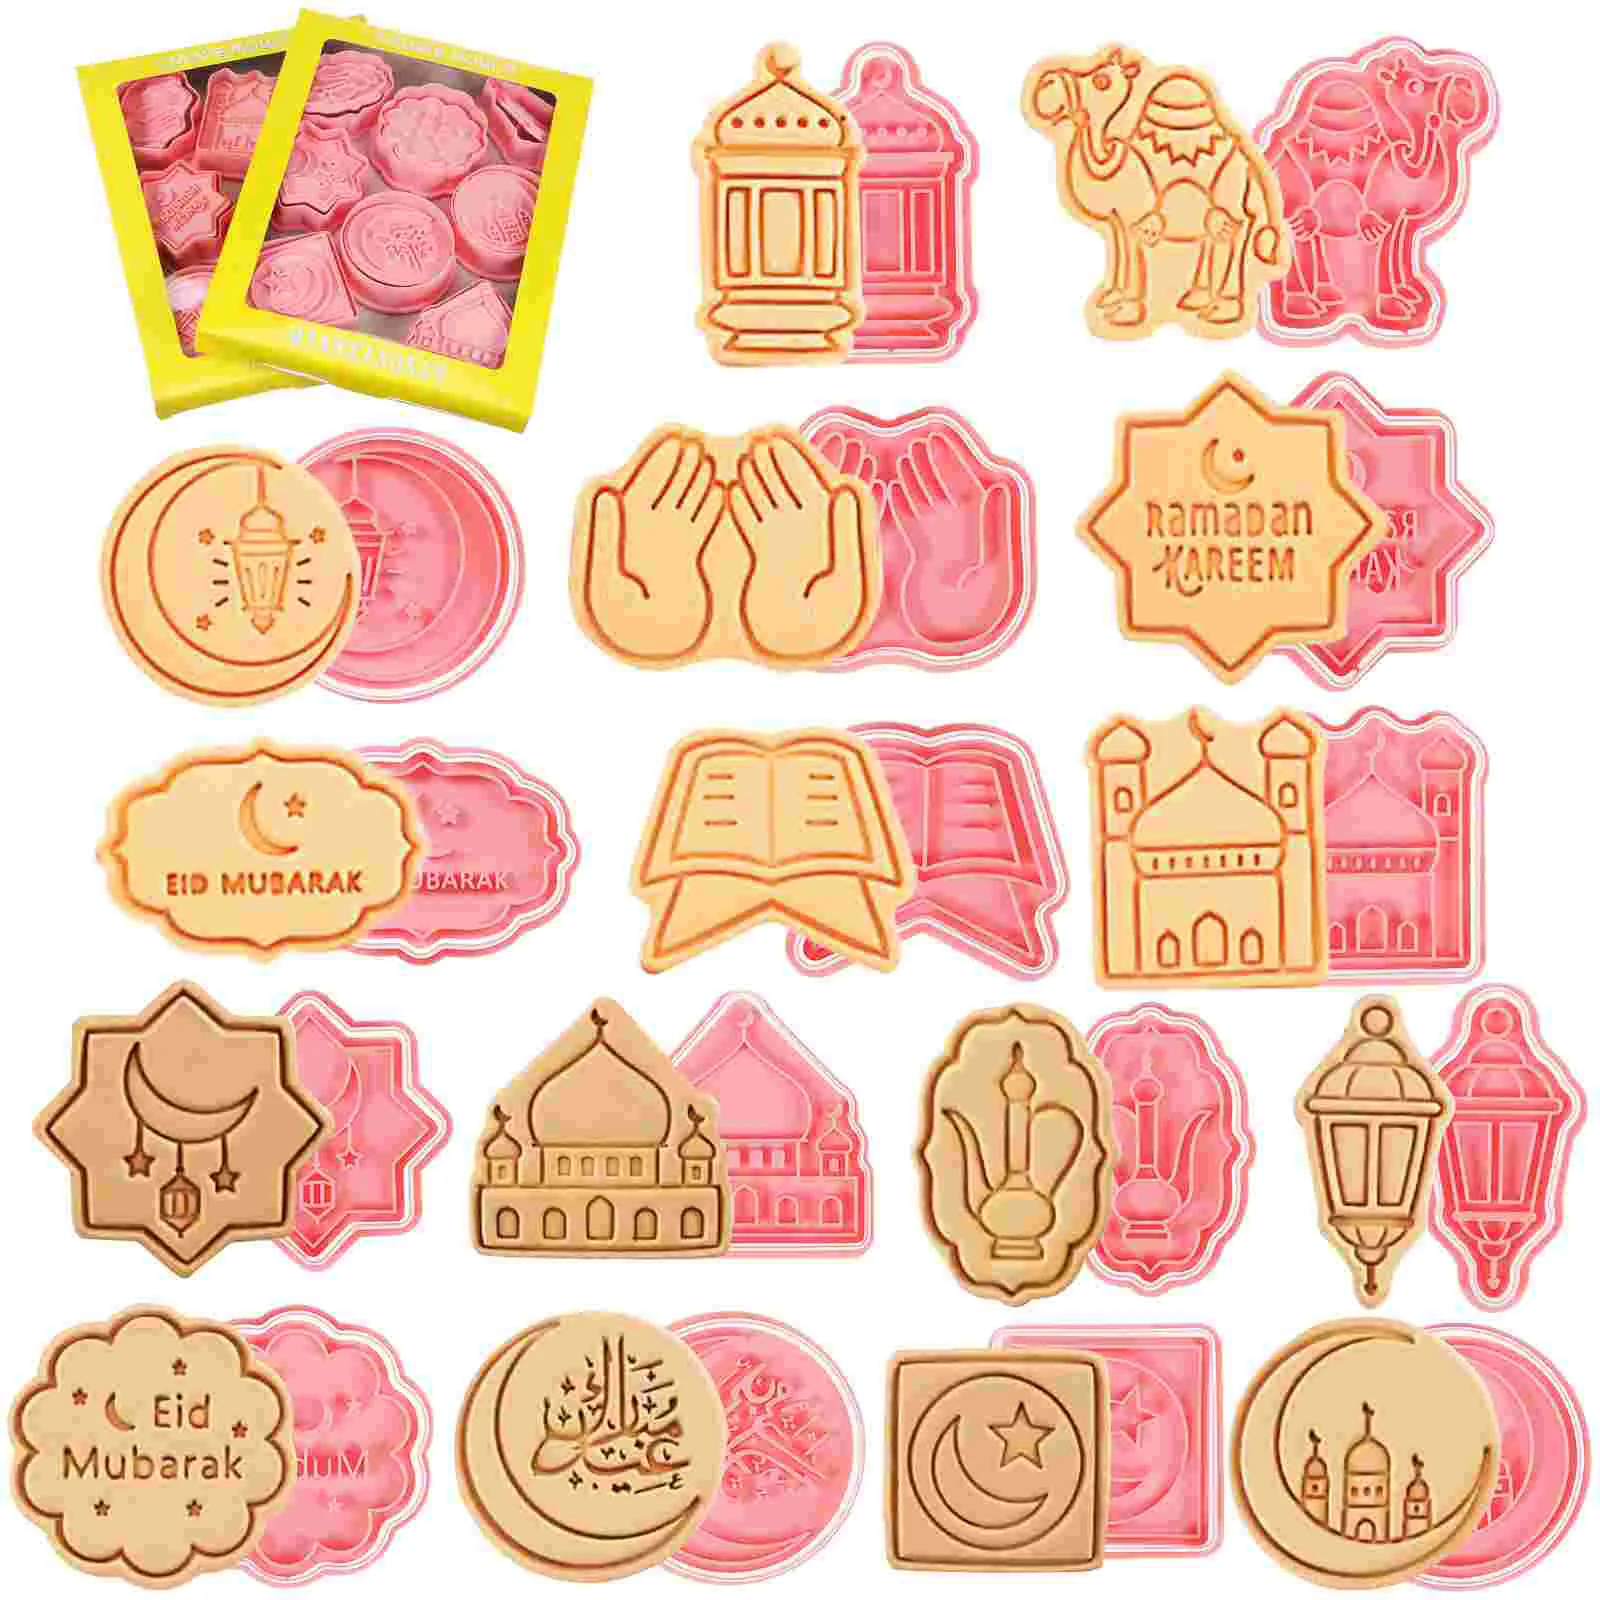 

16 Pcs Postage Stamps Eid Cookie Cutters Mubarak Biscuit Molds Fondant Tool Pastry Press